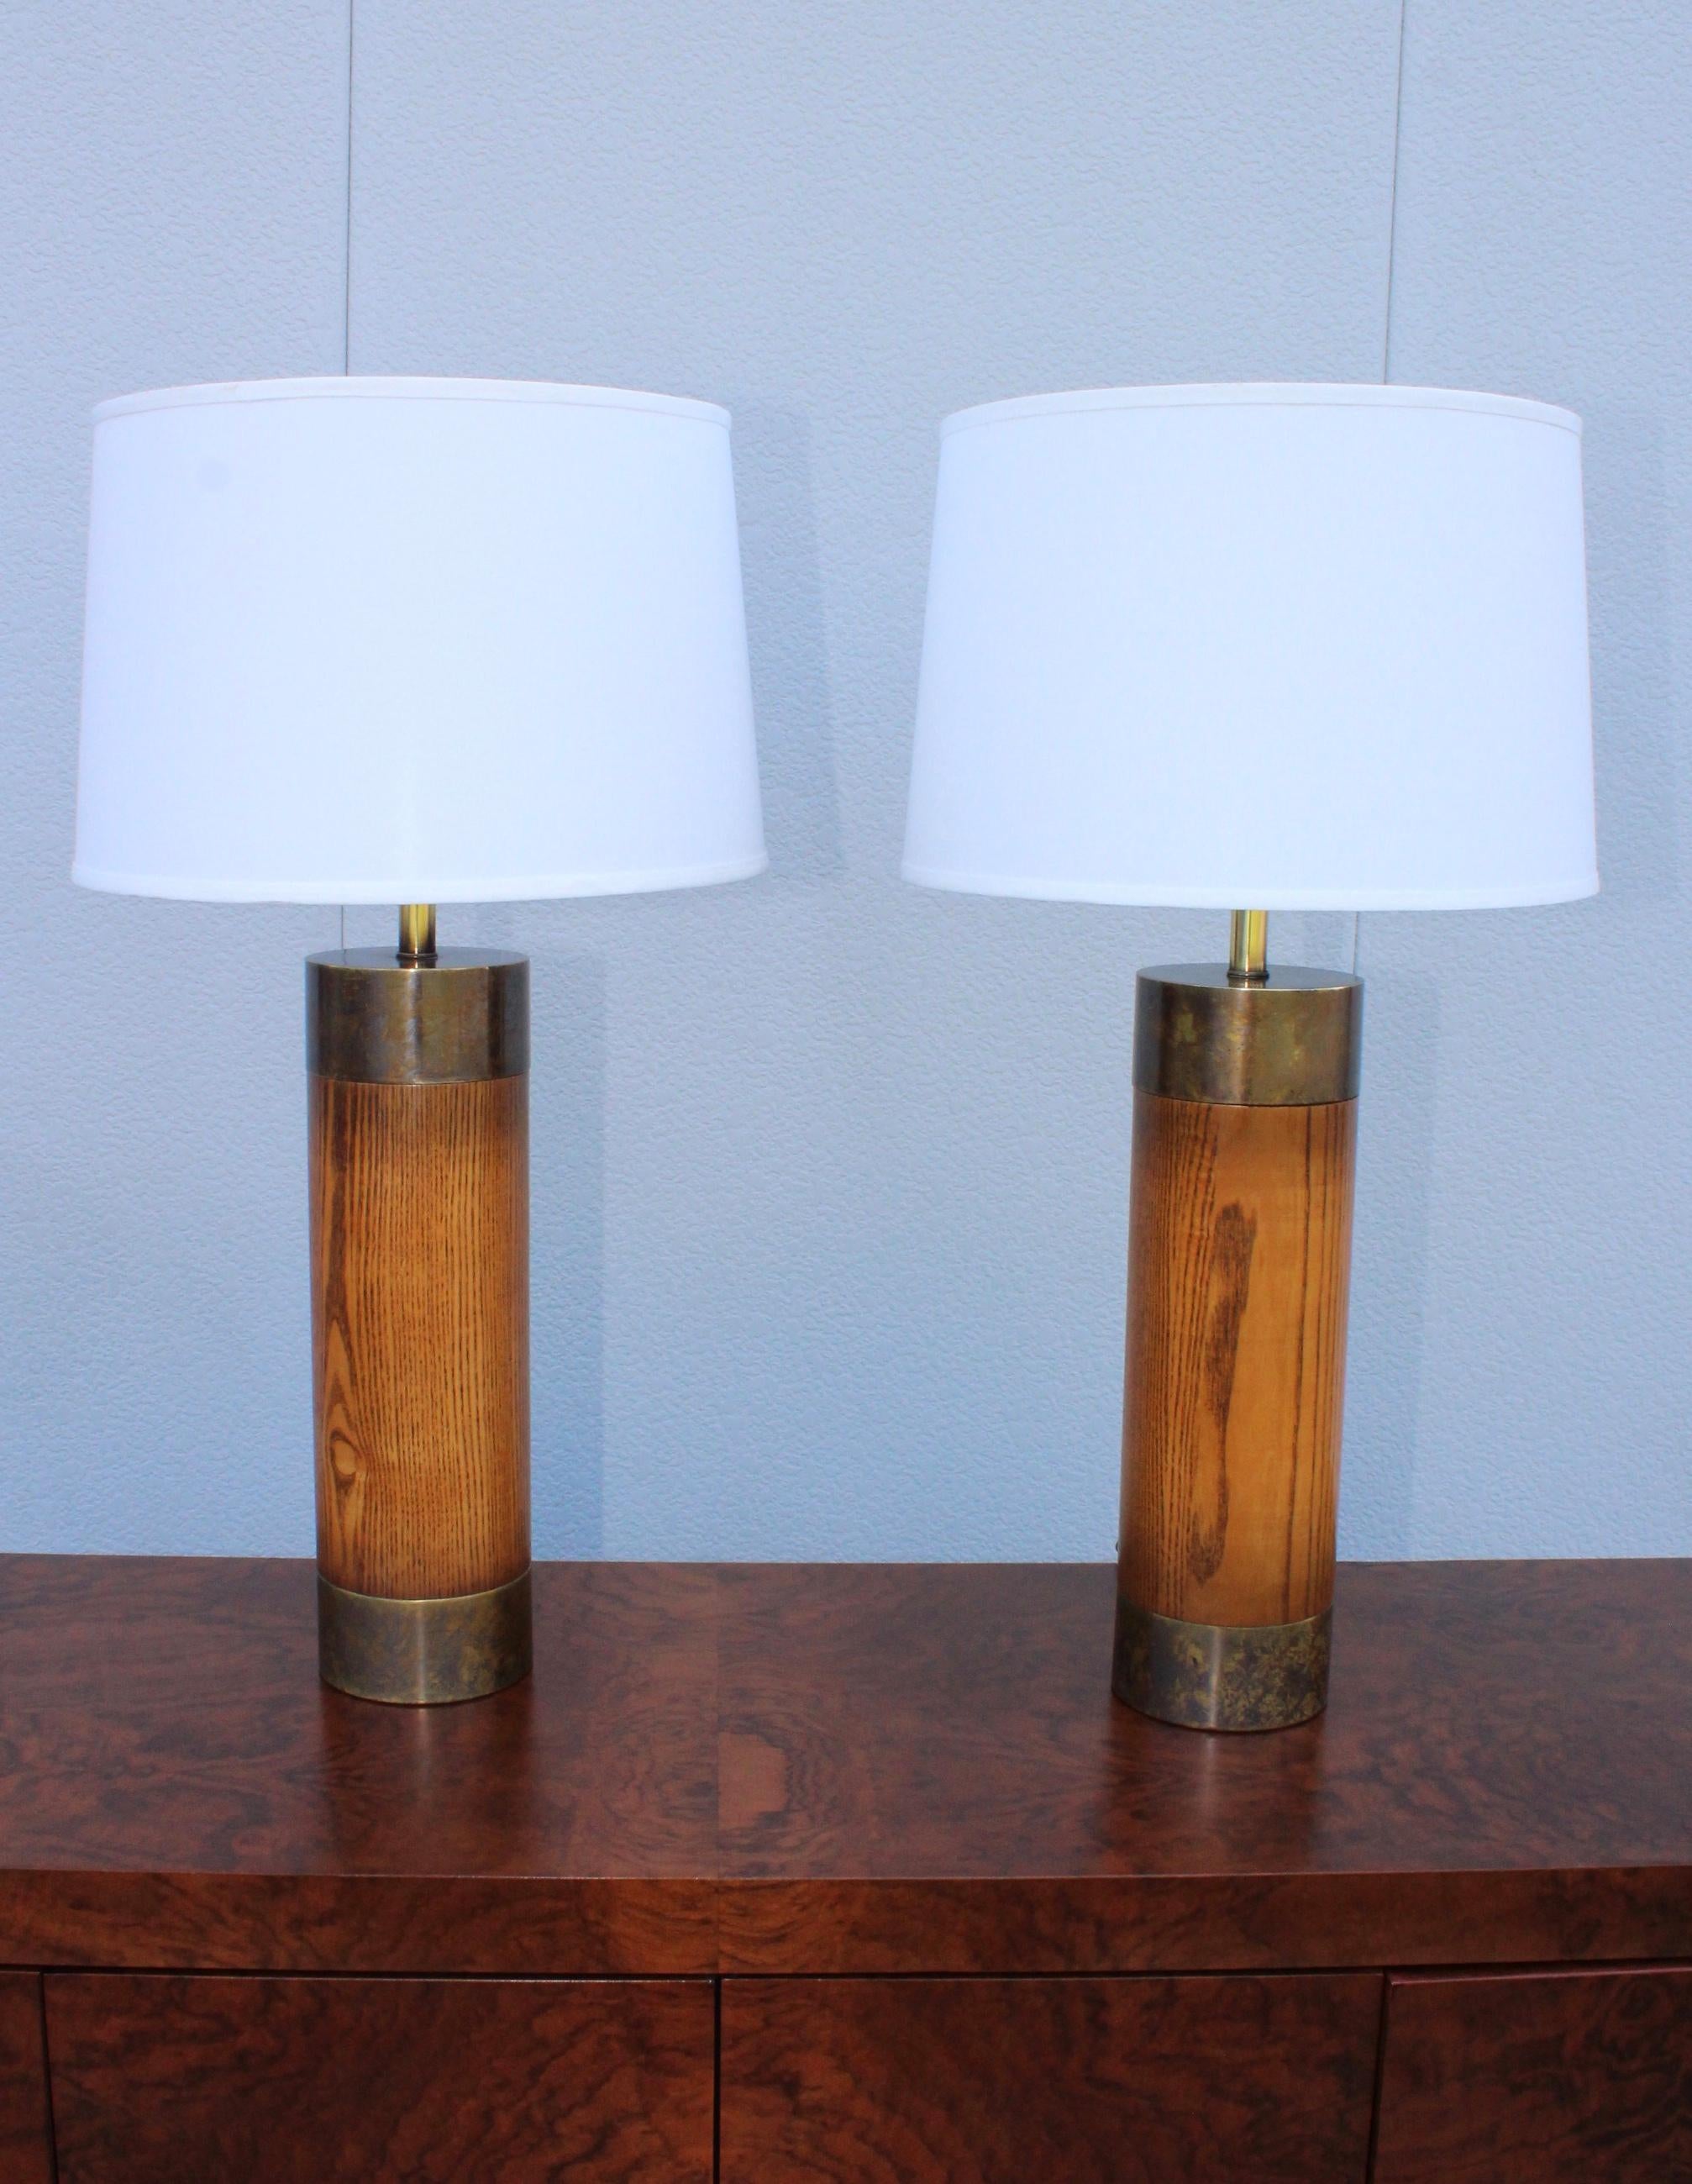 Large pair of 1960s modern patinated bronze and oak table lamps by Westwood.

Measures: Height to light socket 26